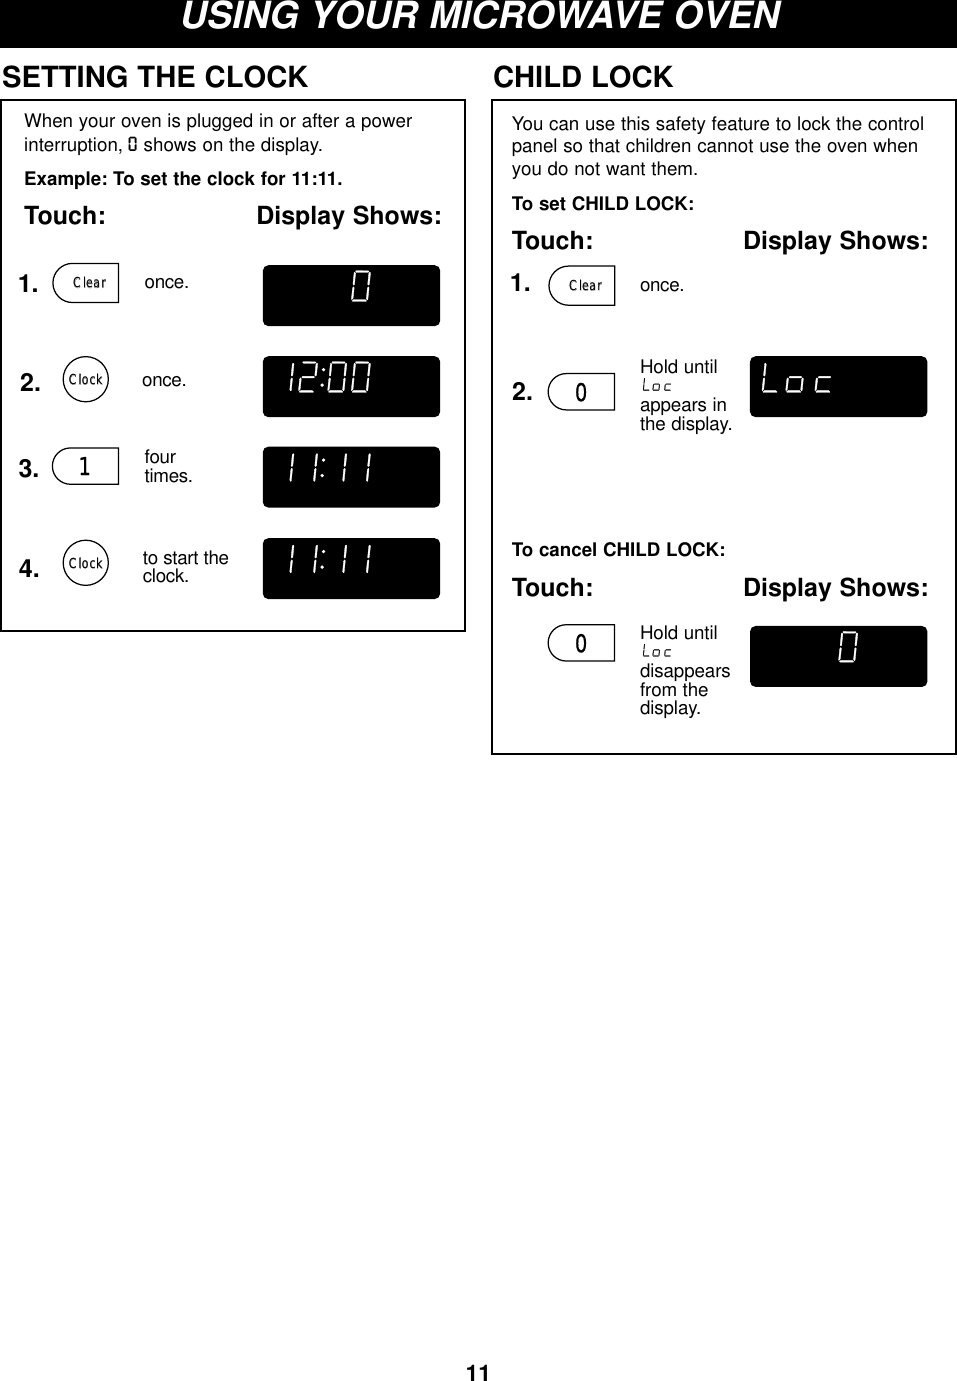 11USING YOUR MICROWAVE OVENWhen your oven is plugged in or after a power interruption, Oshows on the display.Example: To set the clock for 11:11.Touch: Display Shows:SETTING THE CLOCK1. once.2.3. fourtimes.4. to start theclock.once.You can use this safety feature to lock the controlpanel so that children cannot use the oven whenyou do not want them.To set CHILD LOCK:Touch: Display Shows:CHILD LOCKHold untilappears inthe display.To cancel CHILD LOCK:Touch: Display Shows:Hold untildisappears from the display.1ClockClockDEFROST COOK START AUTOLbsOZCUPKgSLICEPCSDEFROST COOK START AUTOLbsOZCUPKgSLICEPCSDEFROST COOK START AUTOLbsOZCUPKgSLICEPCSDEFROST COOK START AUTOLbsOZCUPKgSLICEPCSDEFROST COOK START AUTOLbsOZCUPKgSLICEPCSDEFROST COOK START AUTOLbsOZCUPKgSLICEPCS001. once.ClearClear2.ClearClearClockClock